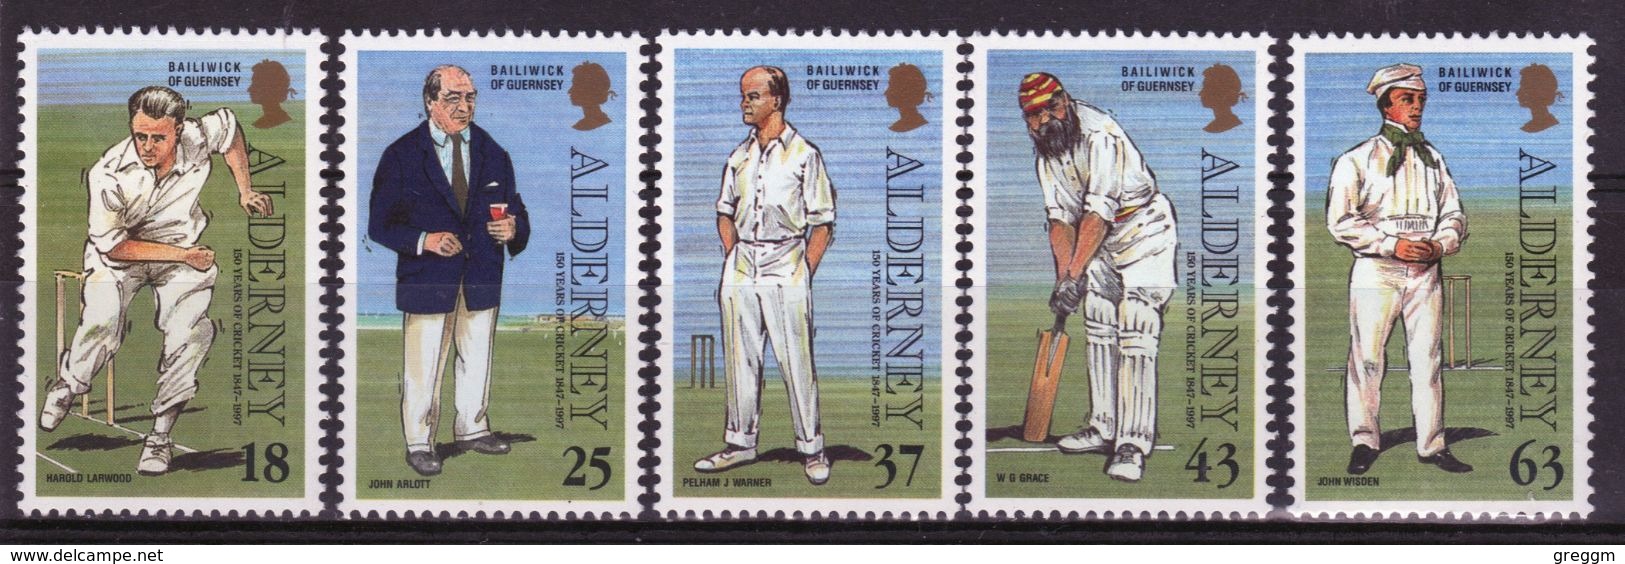 Alderney Set Of Stamps To Celebrate 150th Anniversary Of Cricket On The Island. - Alderney